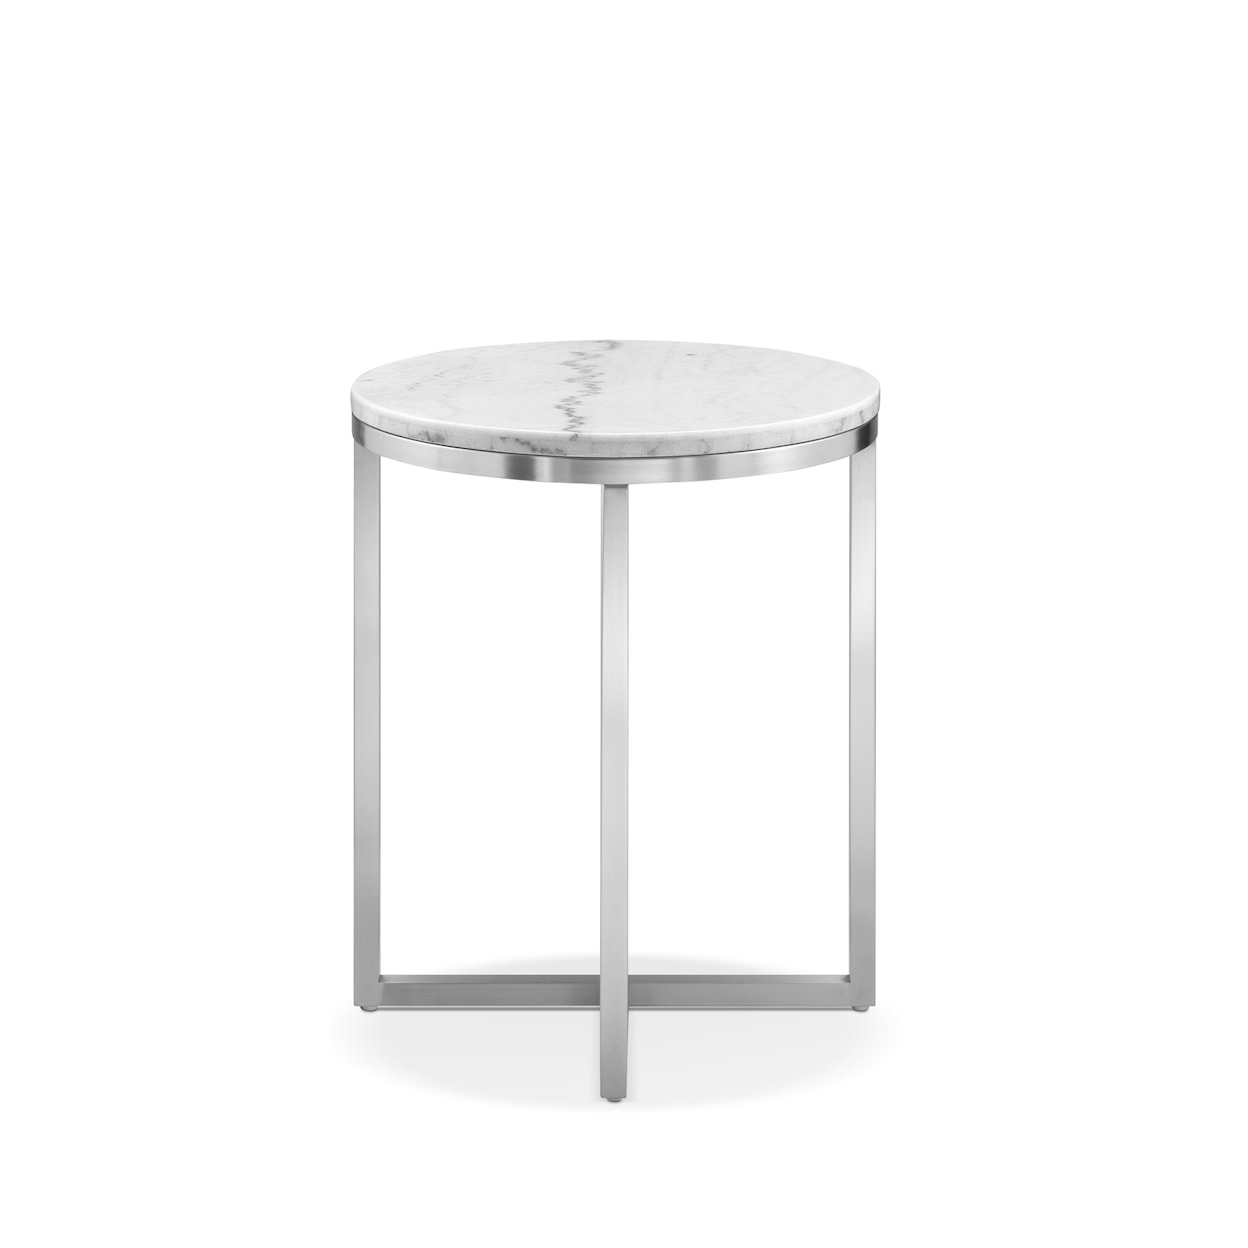 Magnussen Home Esme Occasional Tables Round End Table